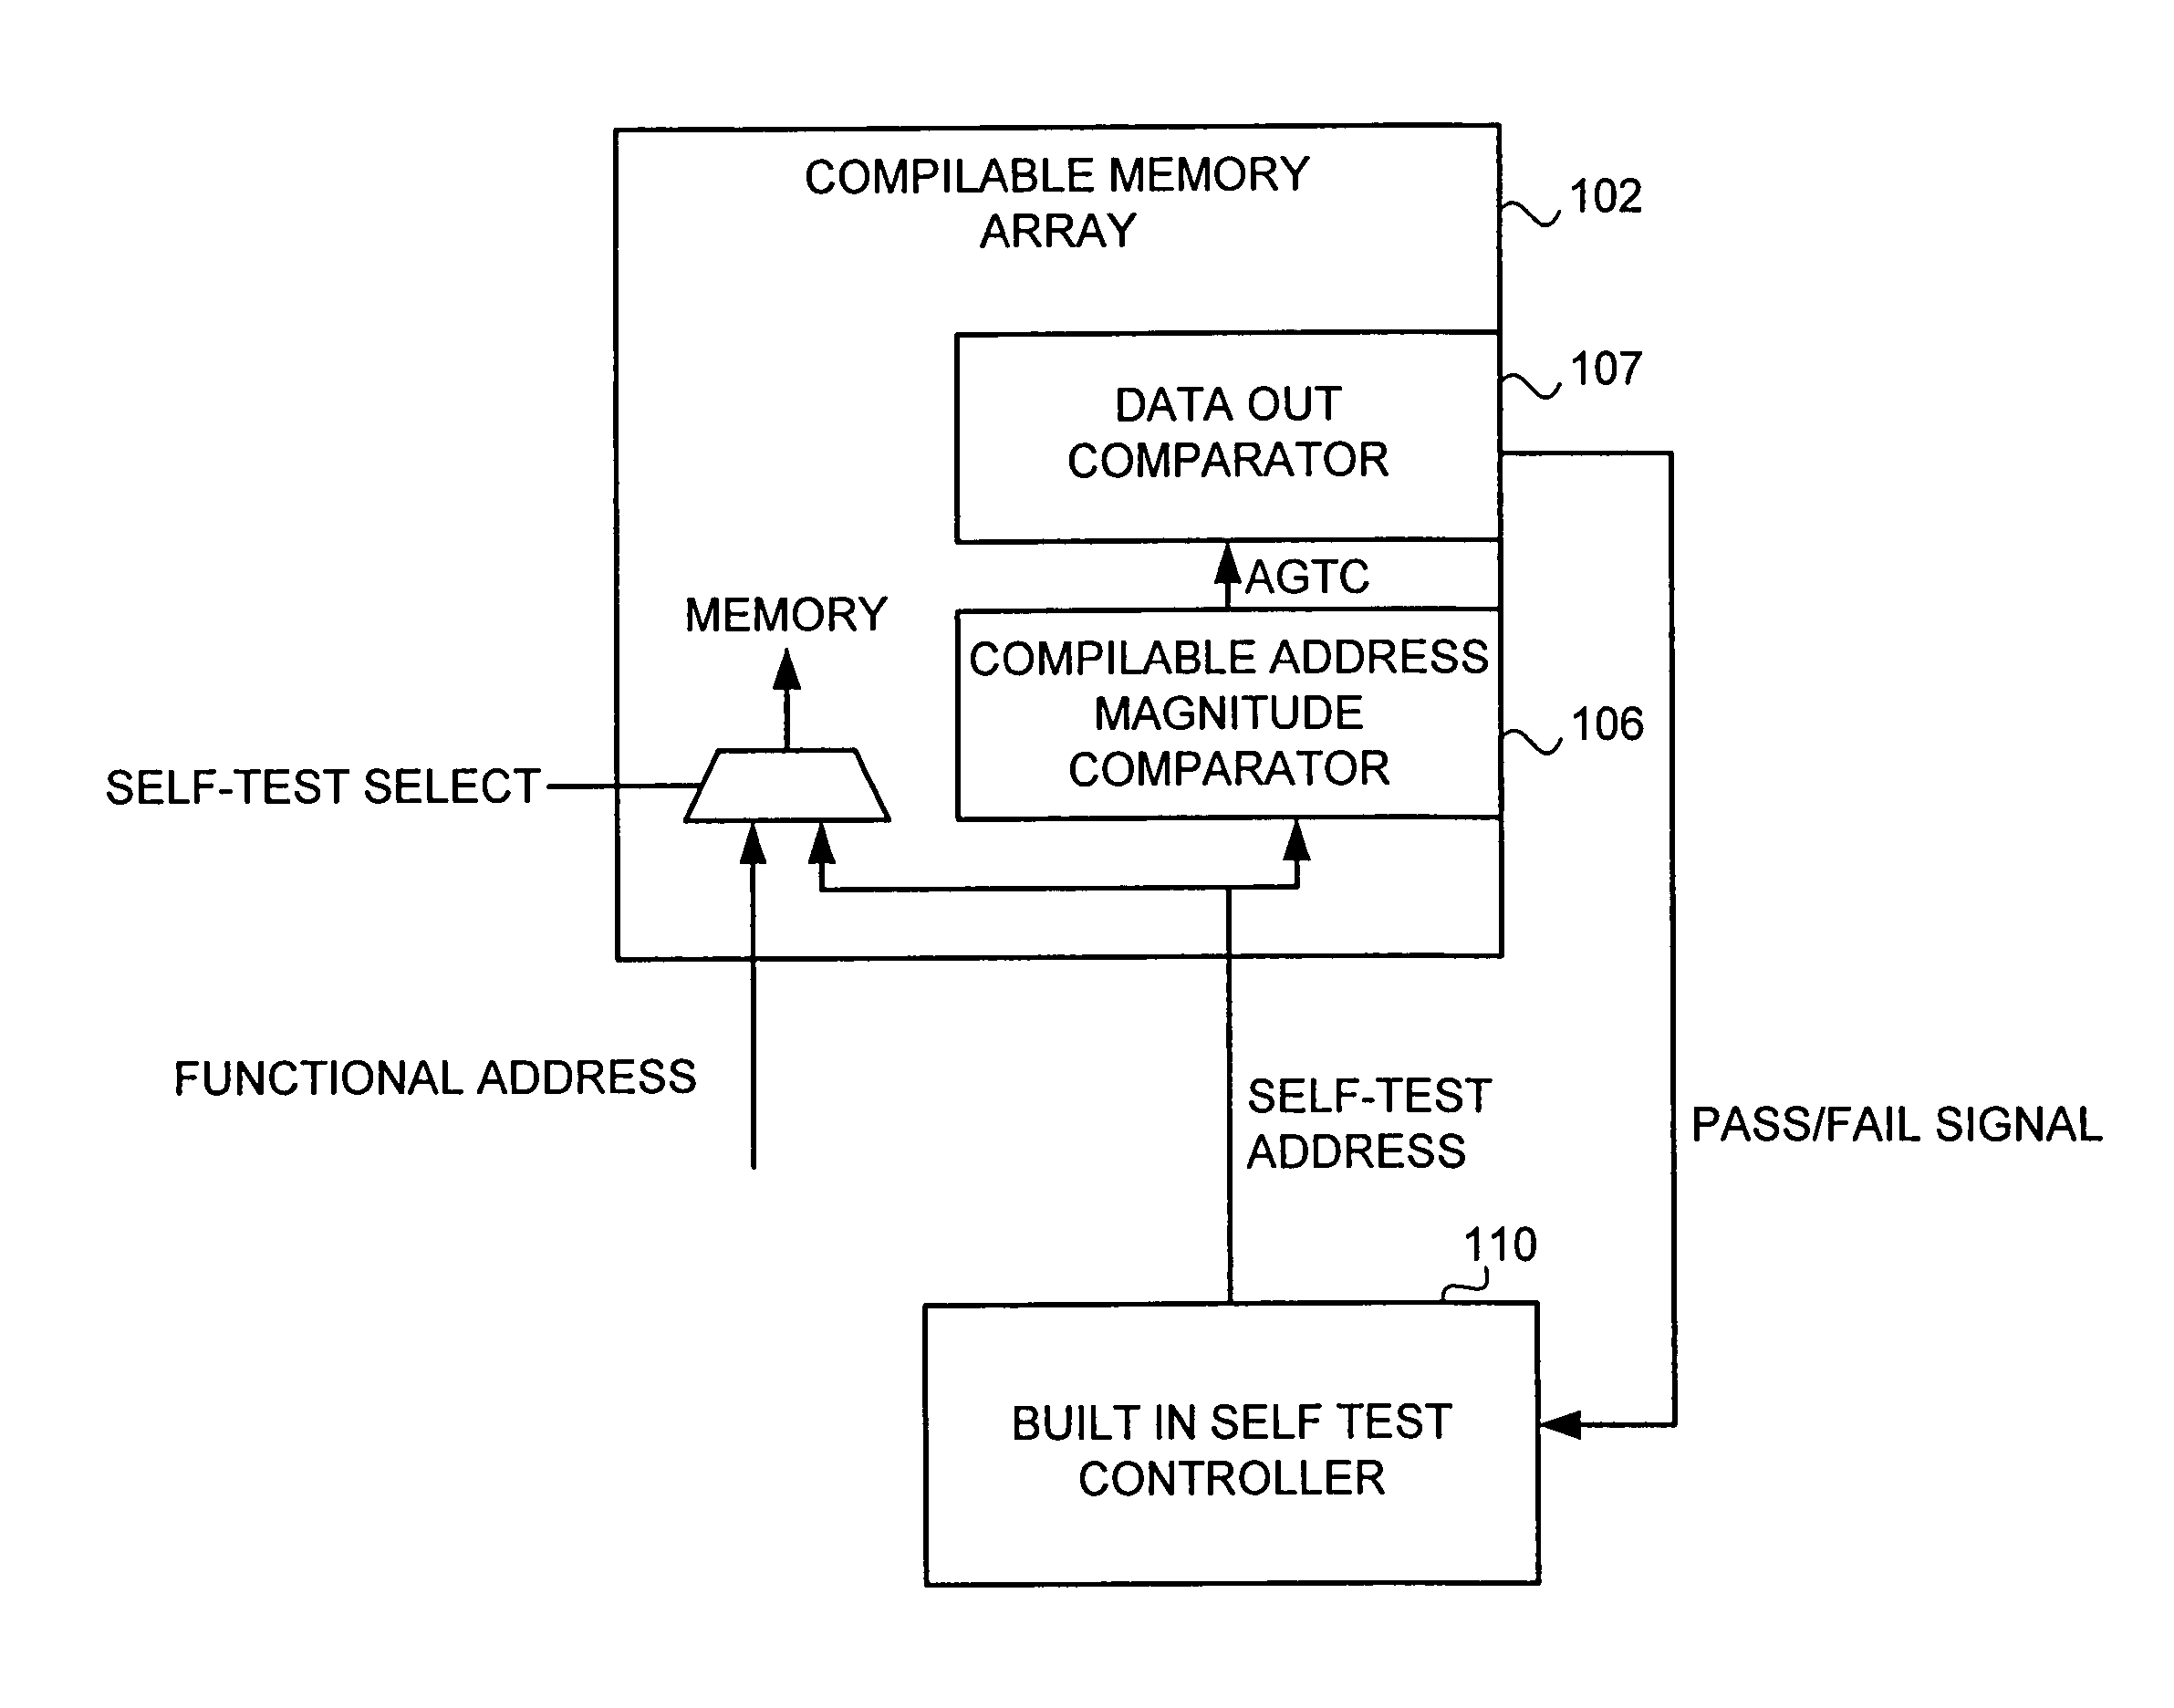 Compilable address magnitude comparator for memory array self-testing